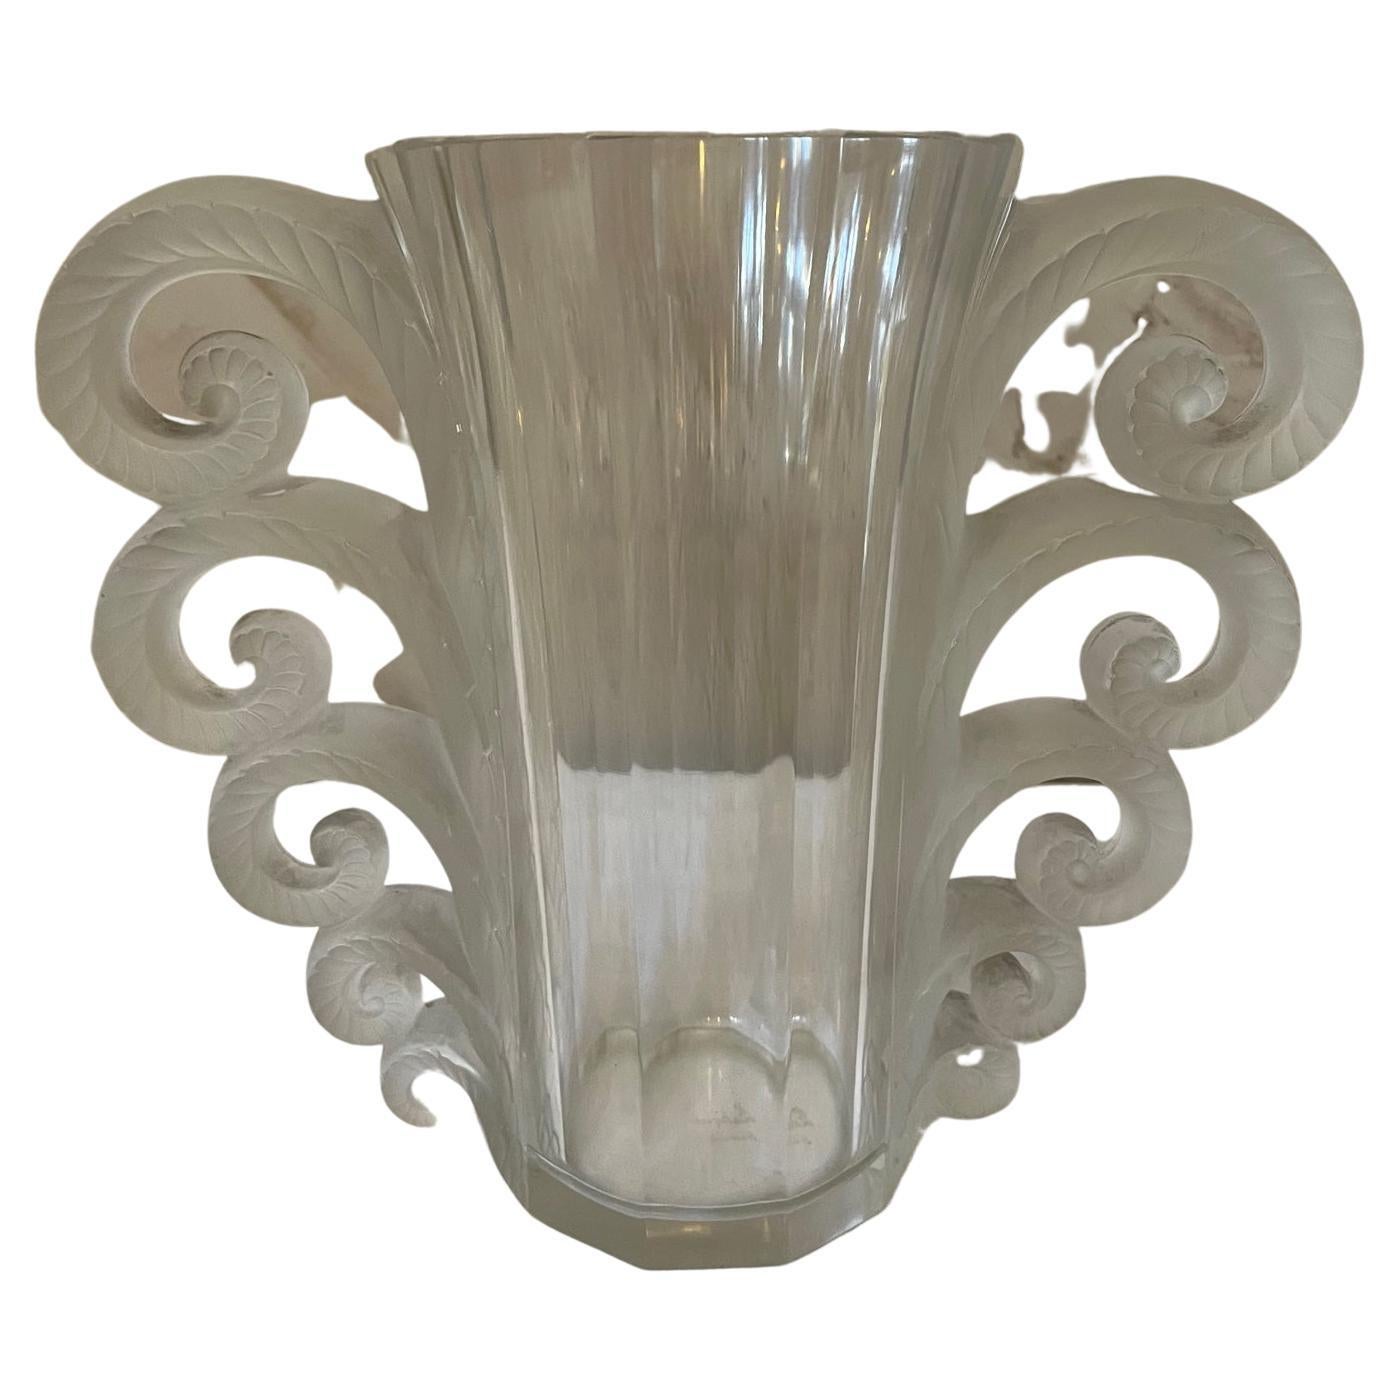 Beautiful 20th century René Lalique Beauvais vase made with a tall clear glass flaring form with five graduating scrolling handle forms on each side. 
Stamped Lalique France at the back. 
Exceptional quality and condition.